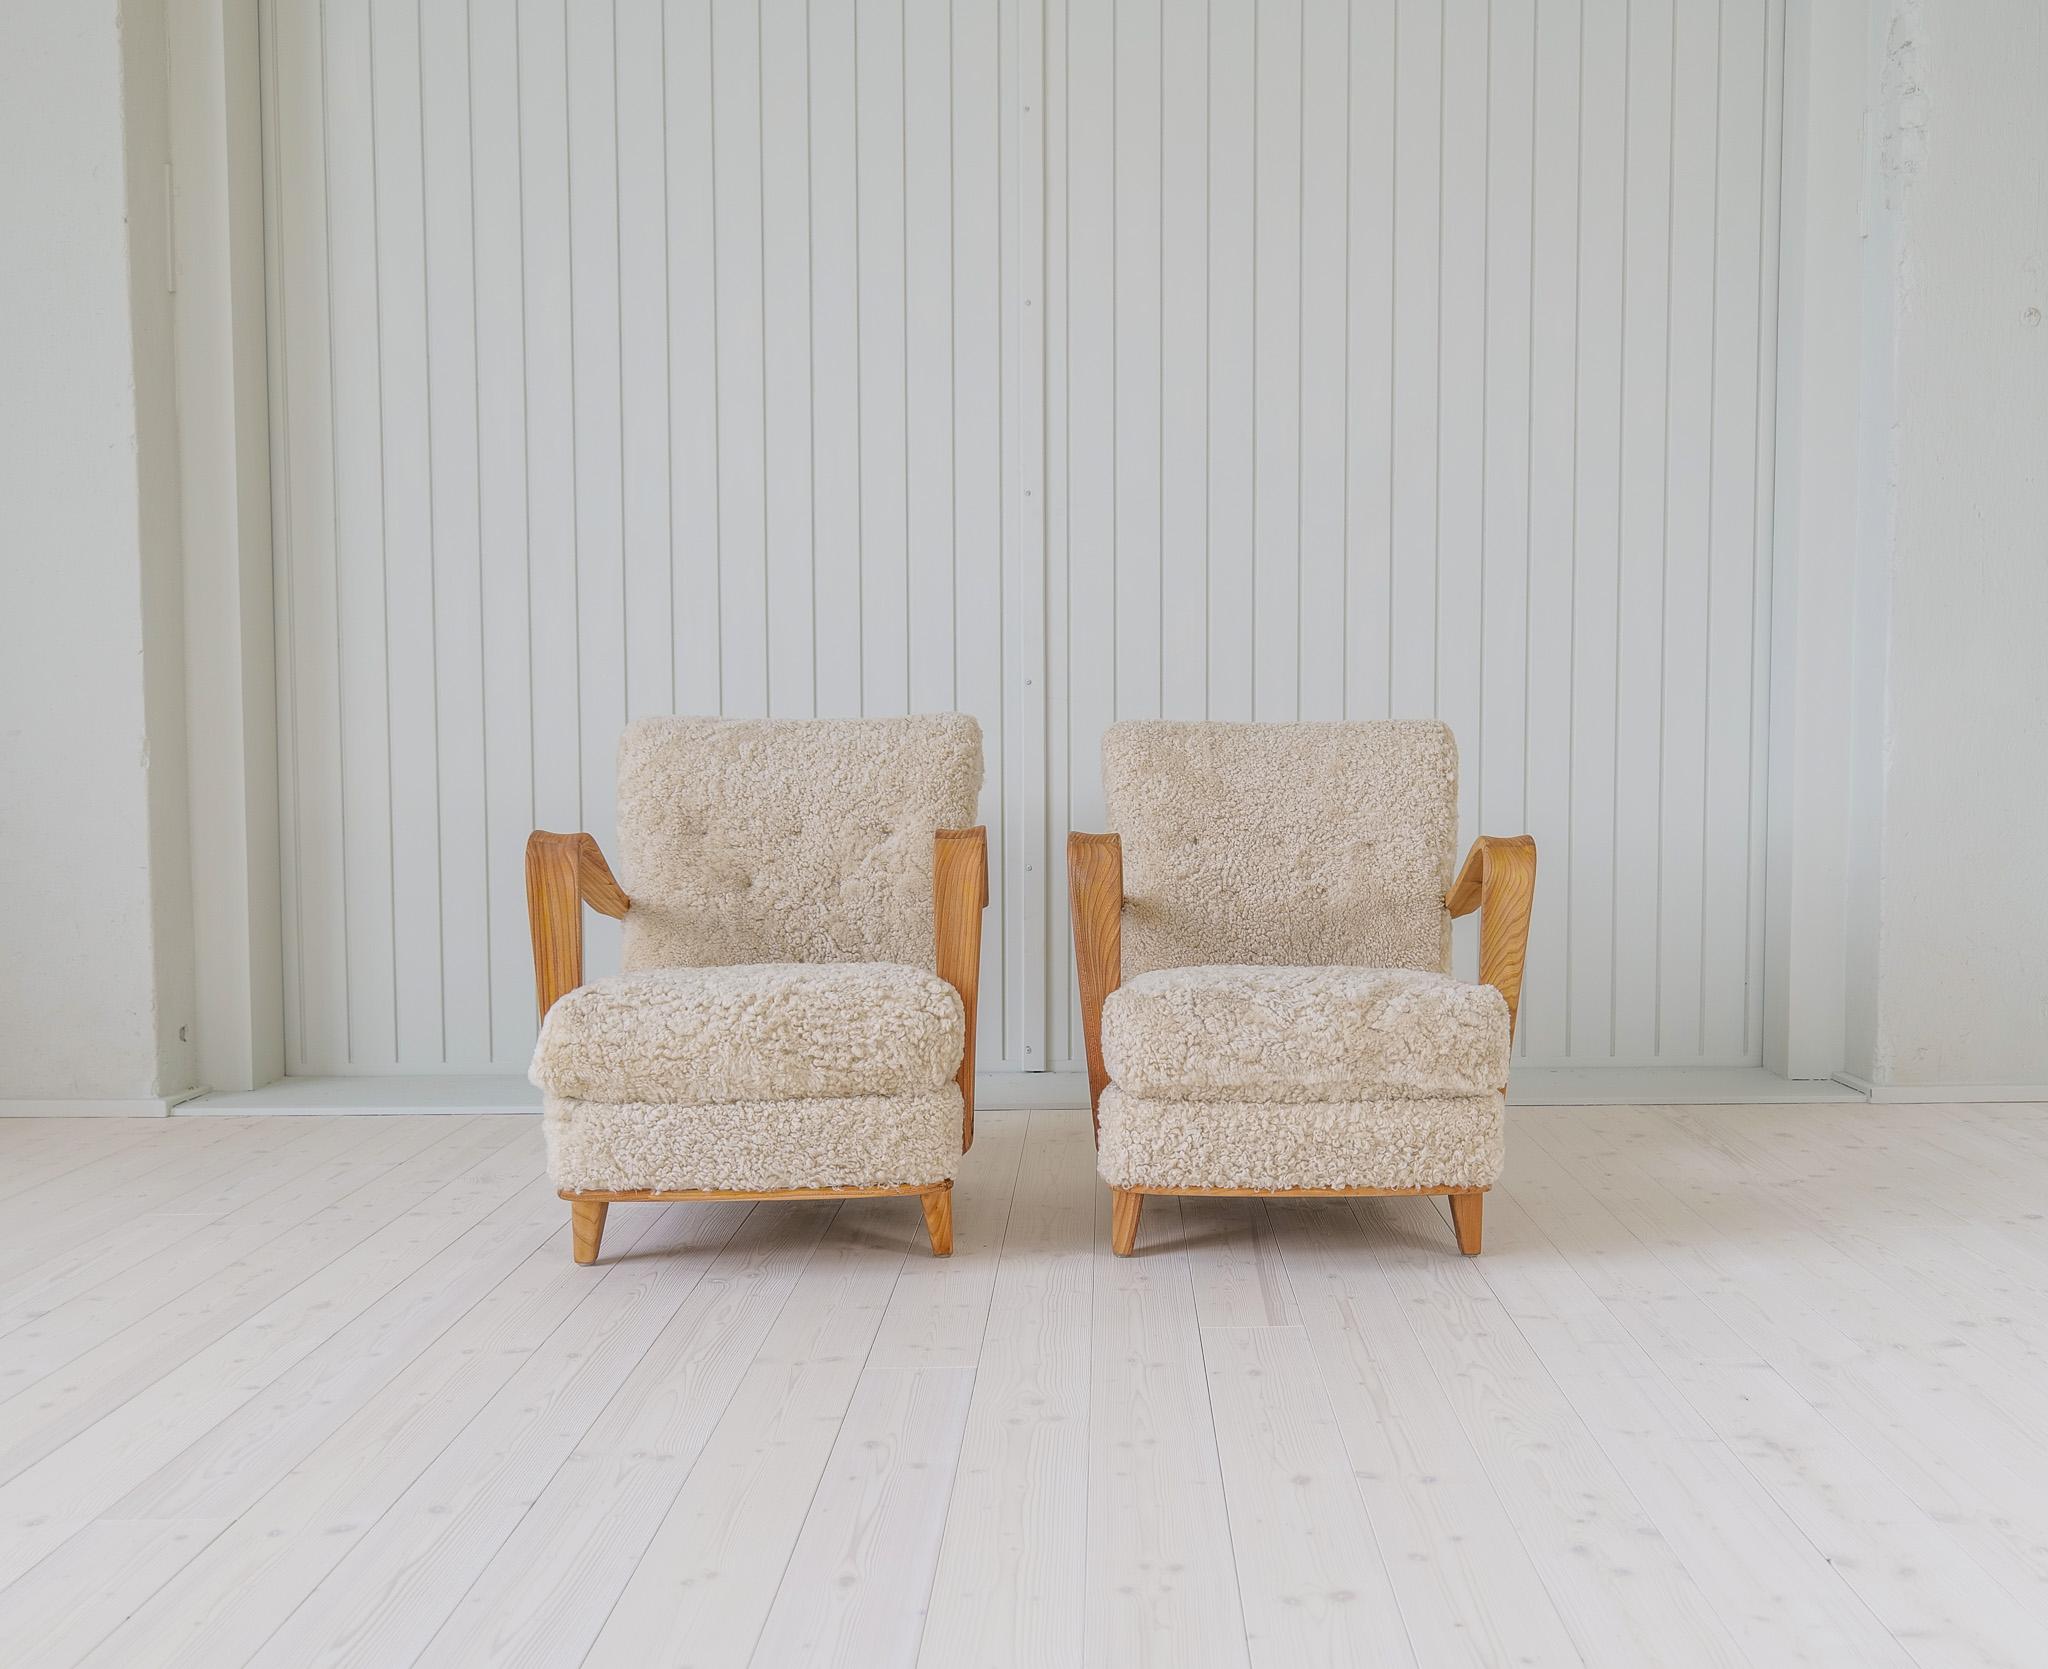 Swedish Modern Lounge Chairs in Shearling / Sheepskin and Elm, 1940s In Good Condition For Sale In Hillringsberg, SE